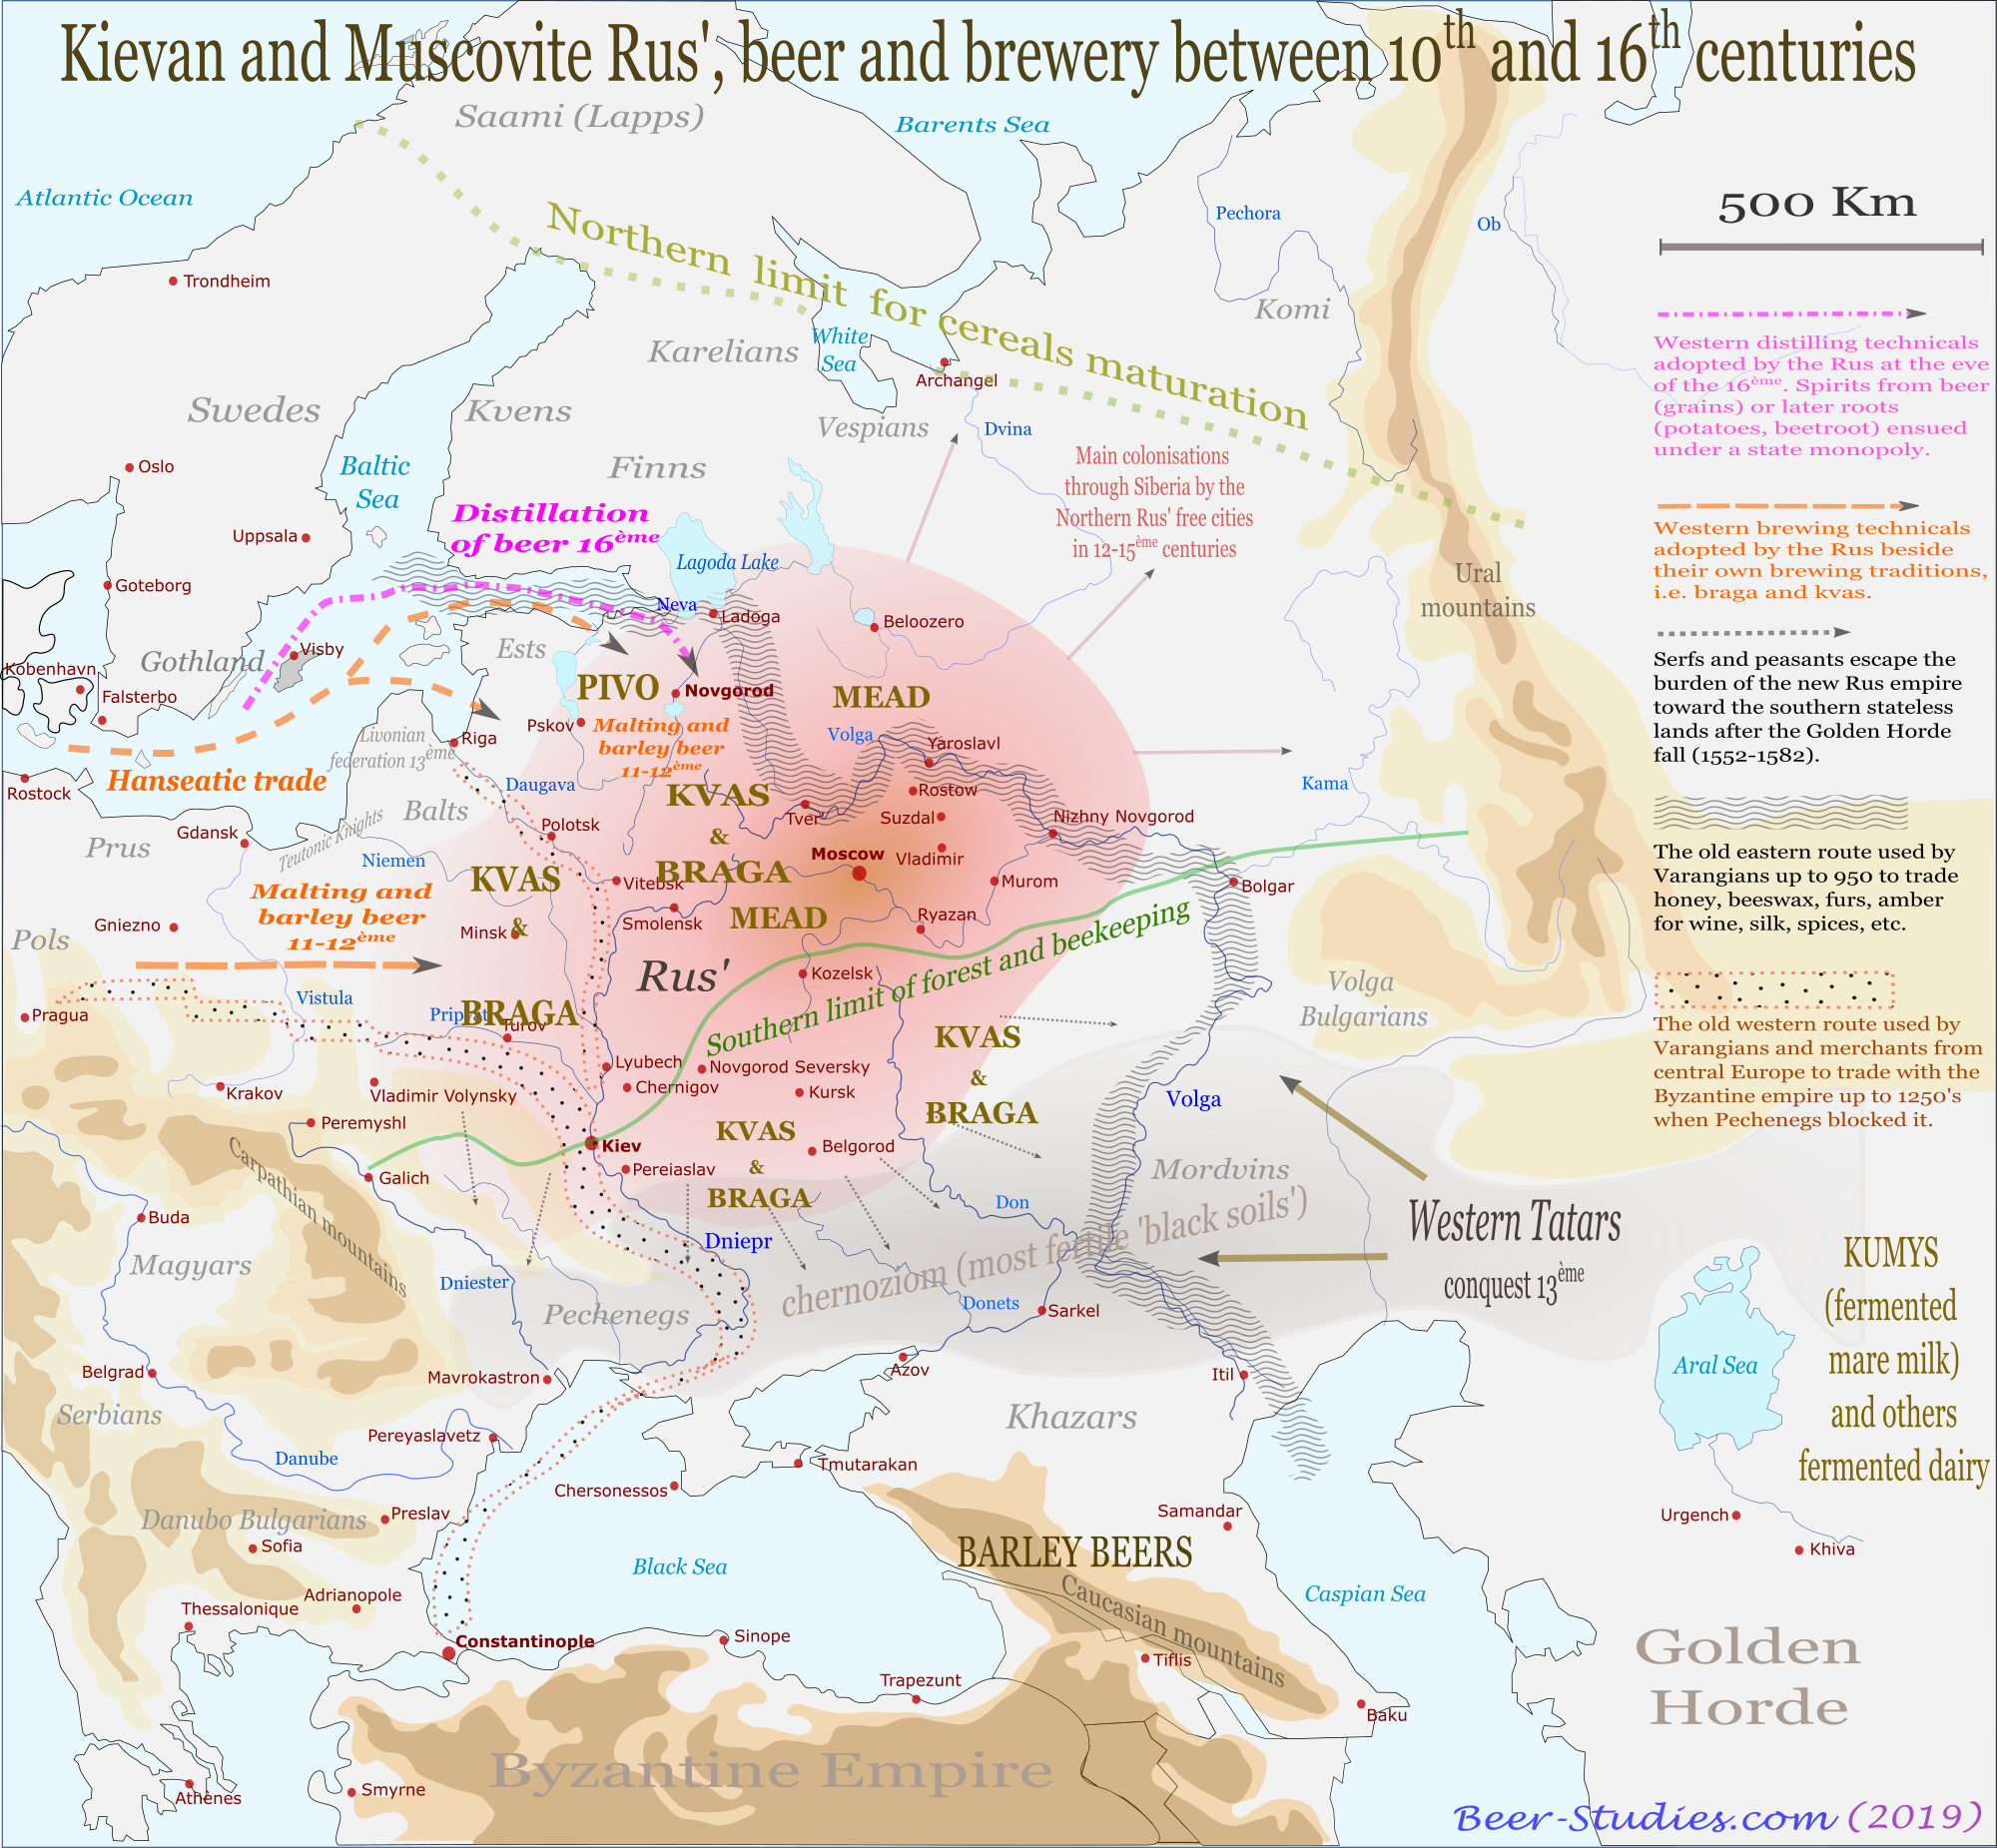 Muscovy, its brewing traditions (kvas, braga and pivo) from 10th to 16th centuries, a country between the Tatars in the east (fermented mare's milk) and the Hanseatic cities in the west (barley beer). Developments in brewing techniques and population movements.